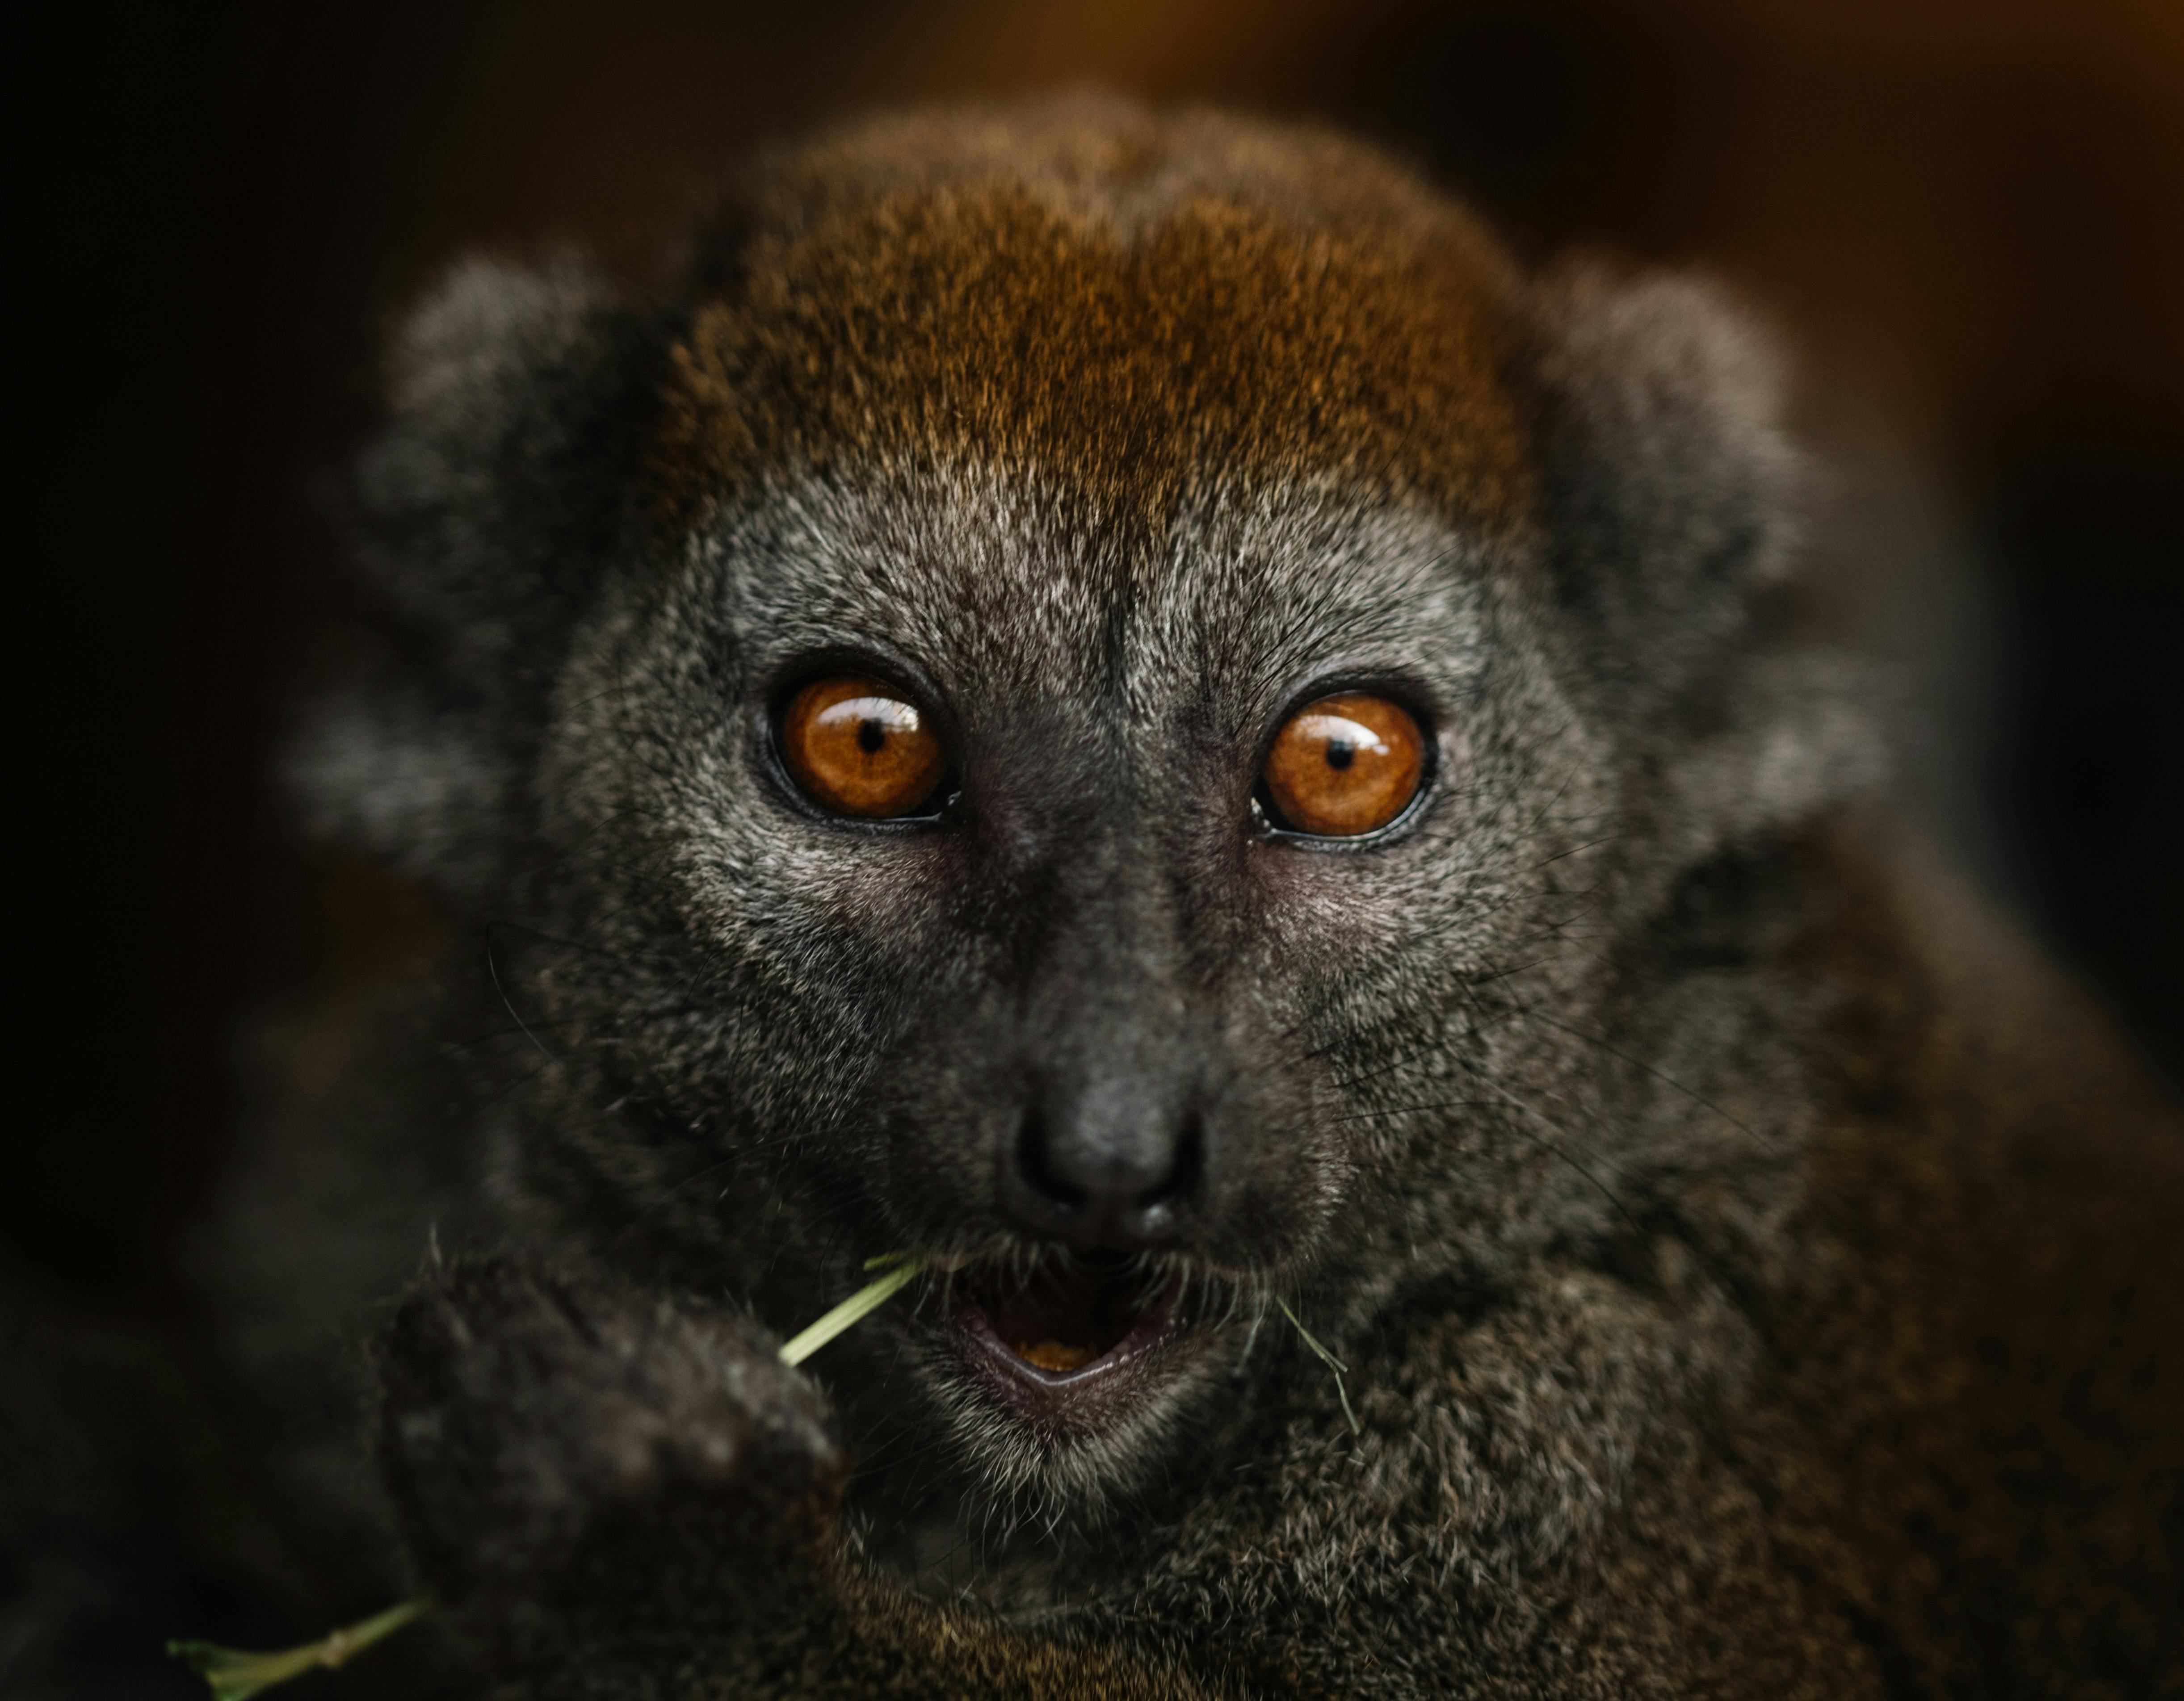 bamboo lemur with shiny brown eyes eating green plant